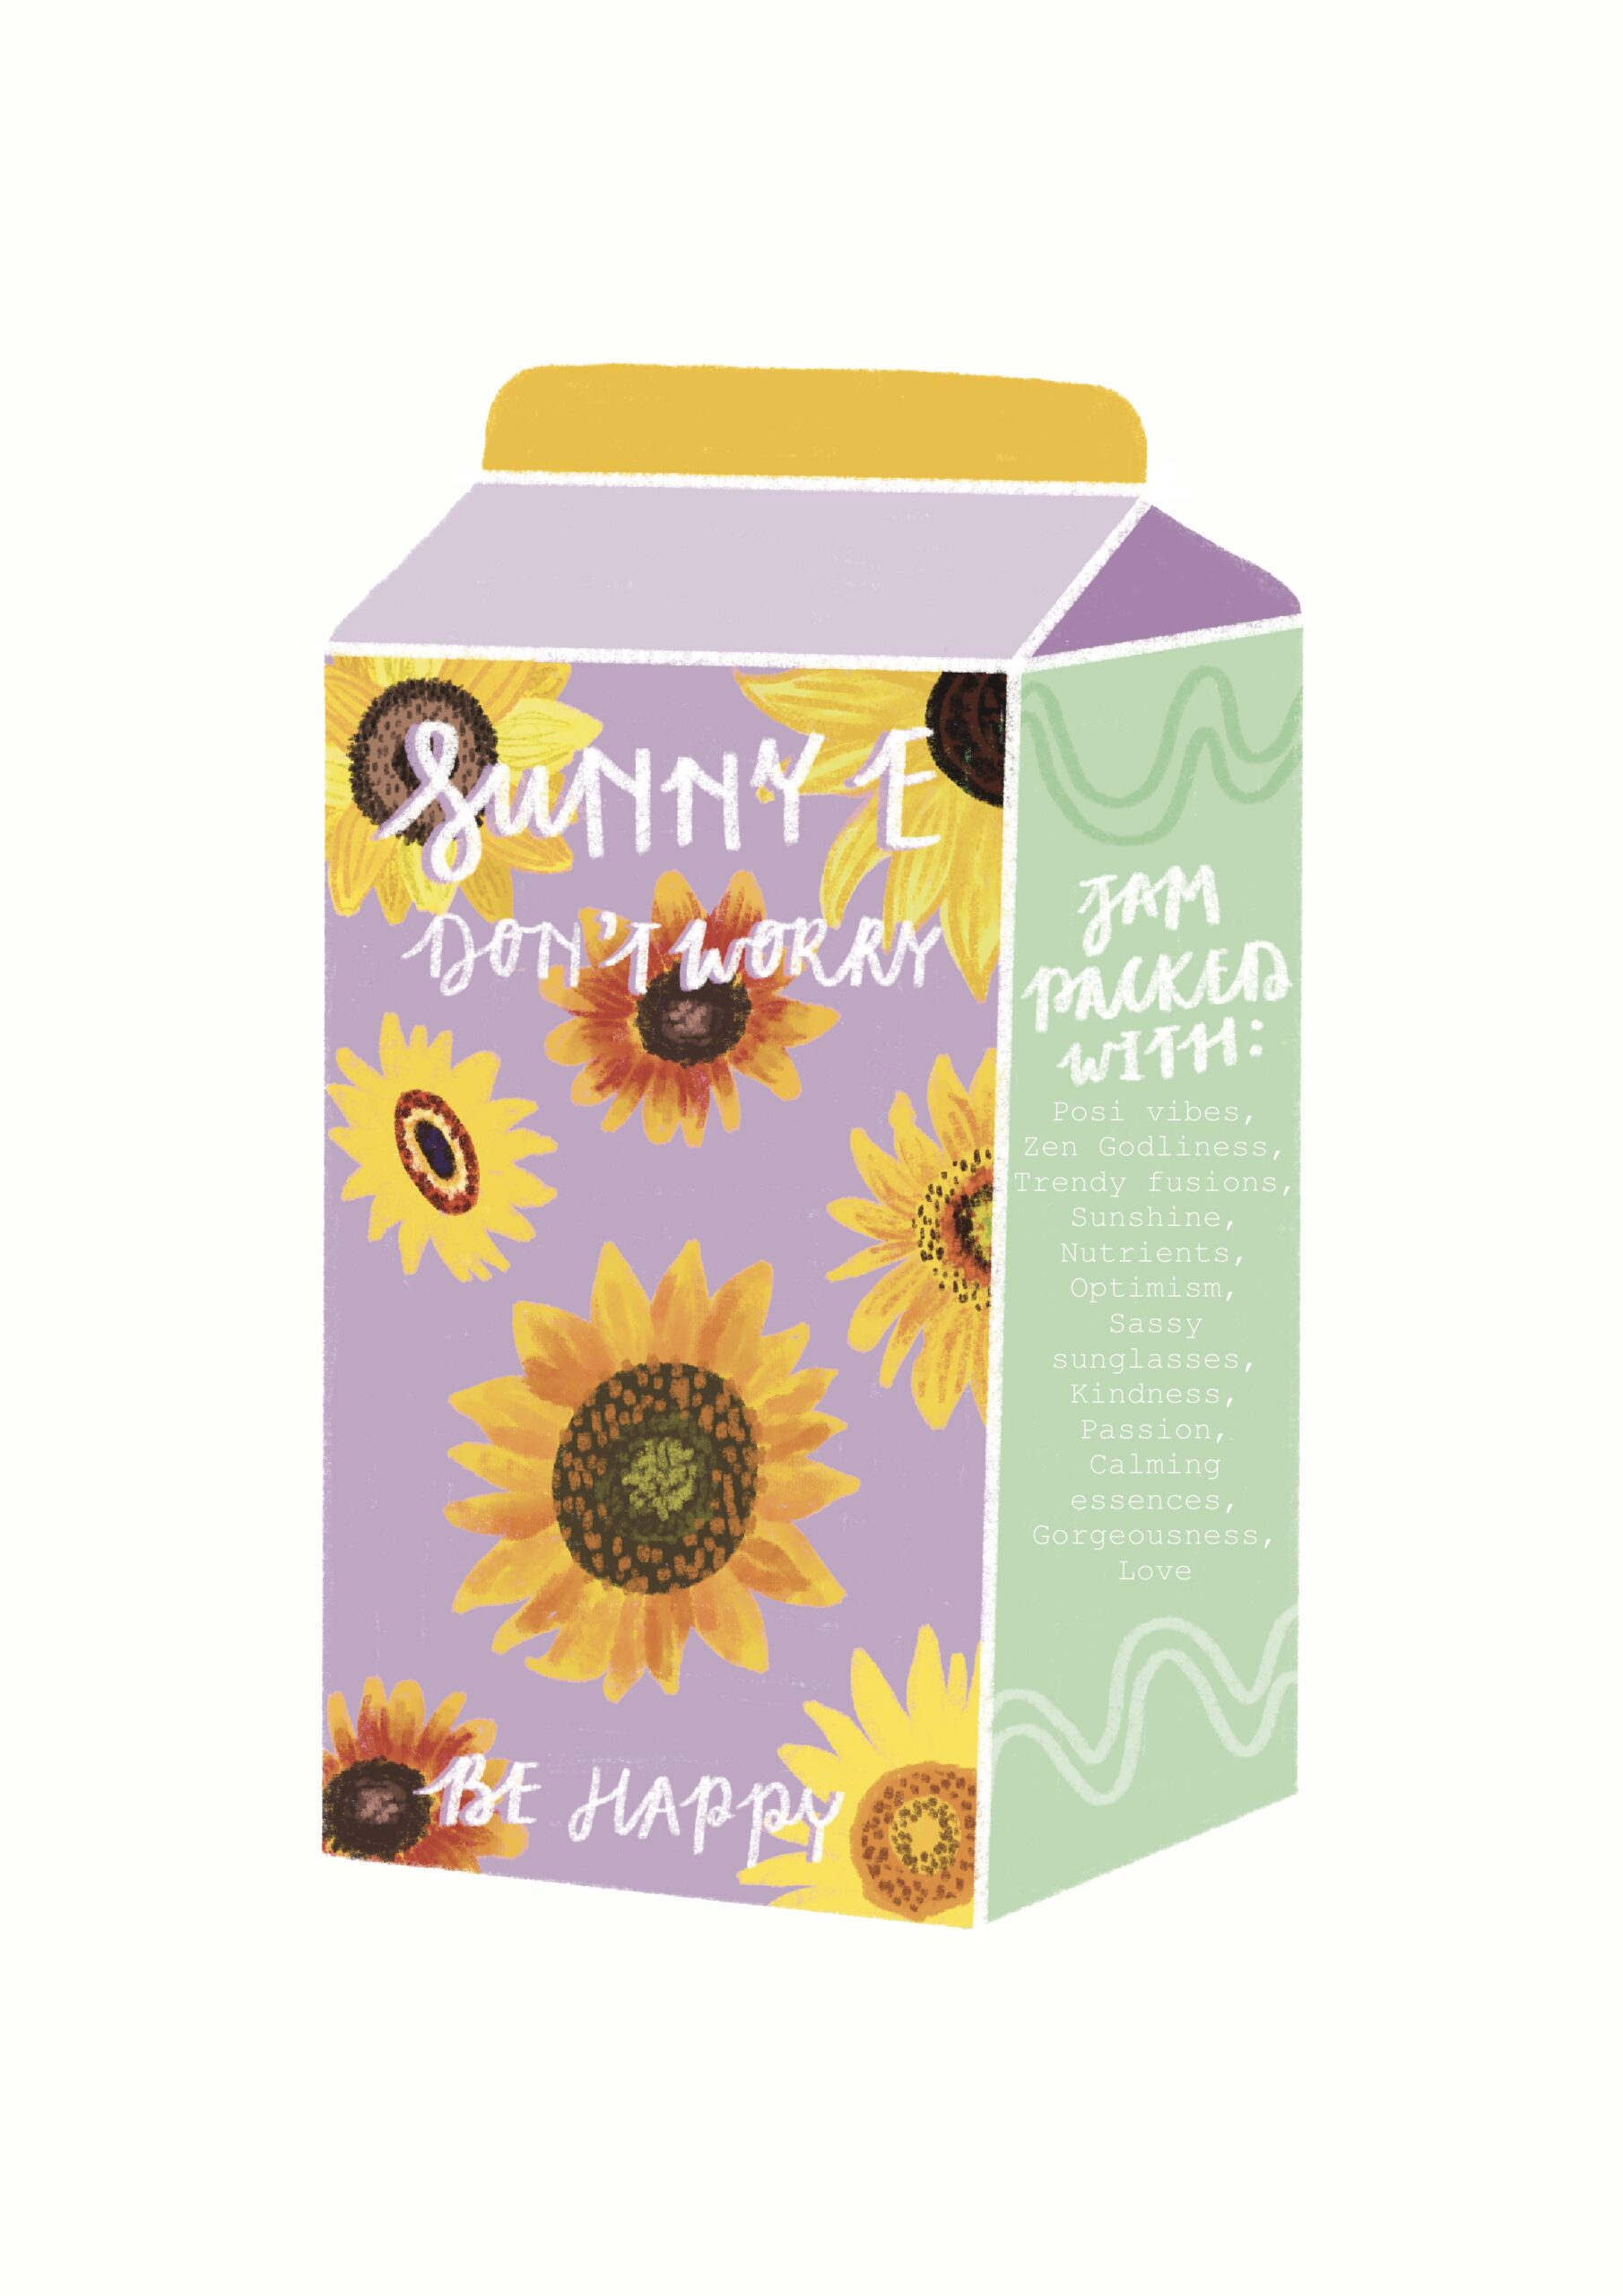 A carton of juice with the words "Sunny E" on it, instead of Sunny D - an art print for a friend